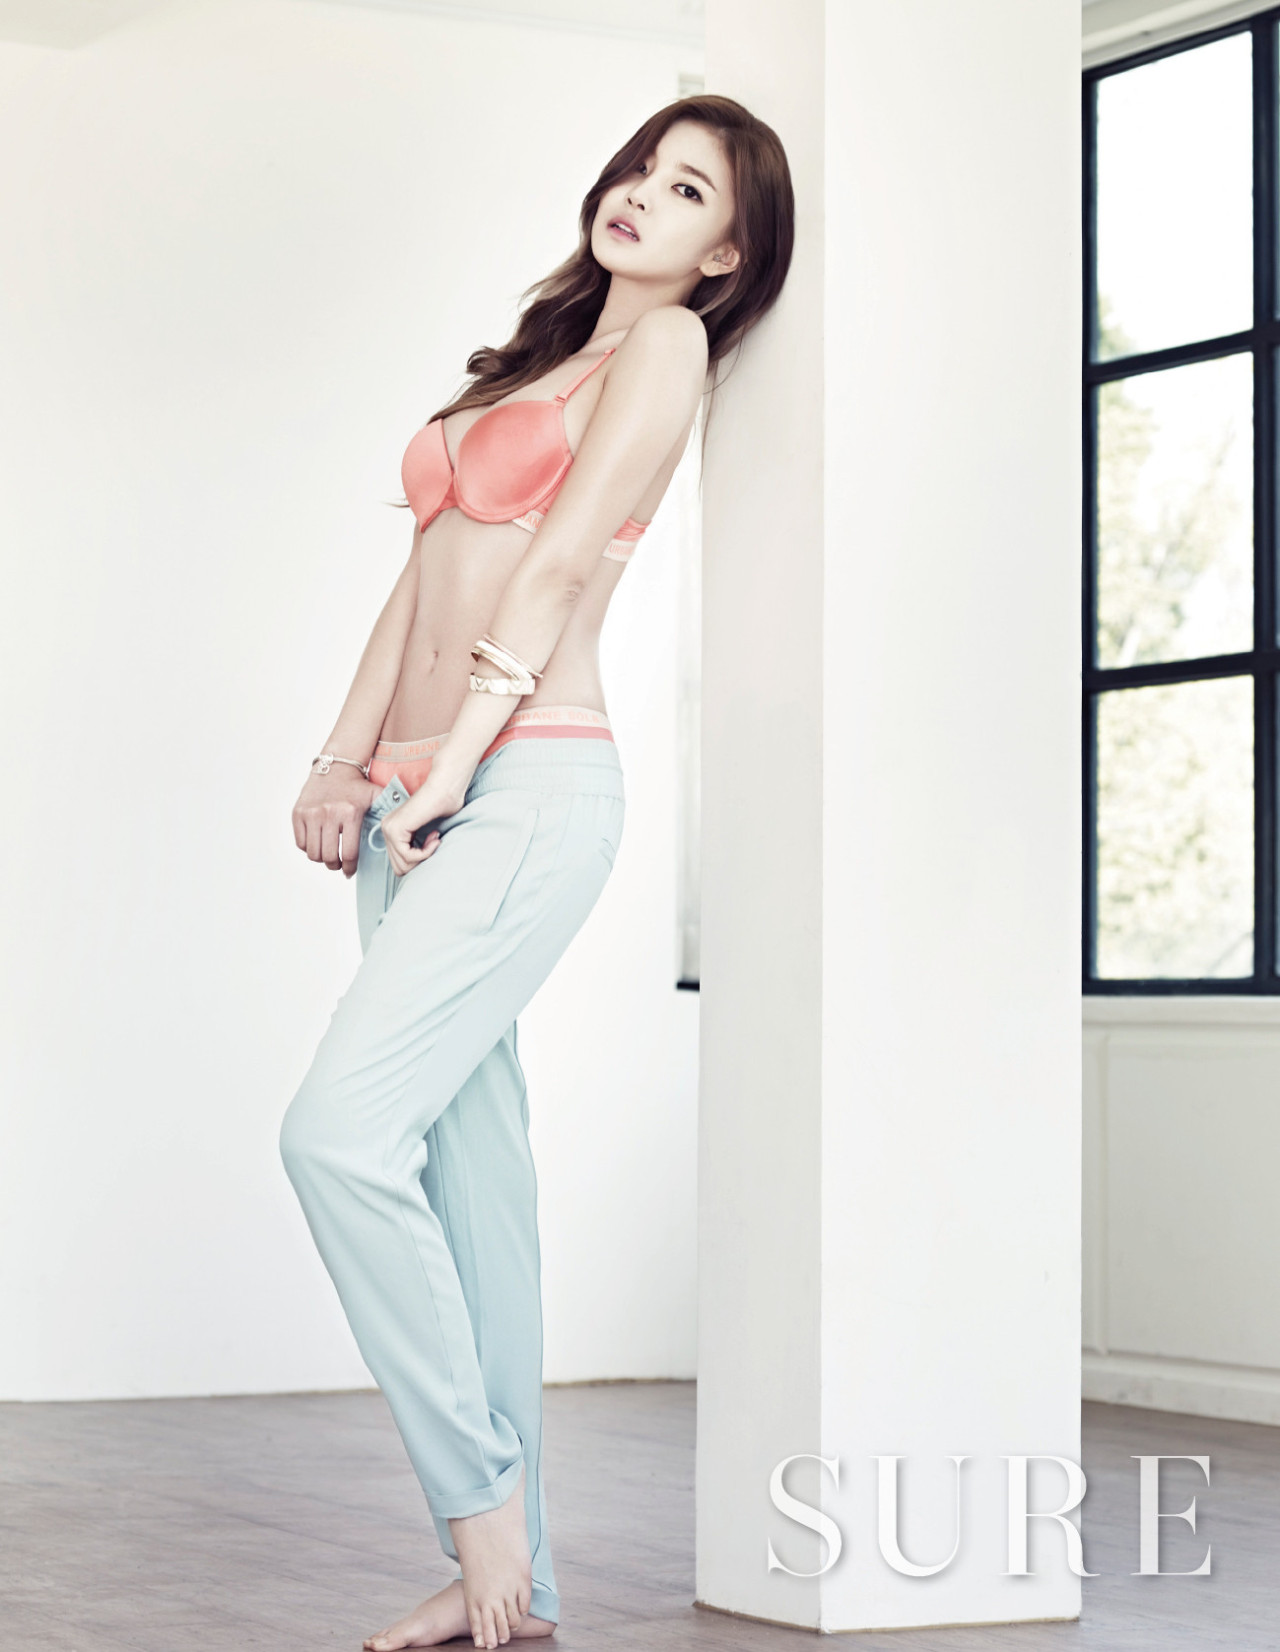 Ns Yoon-G Wallpapers